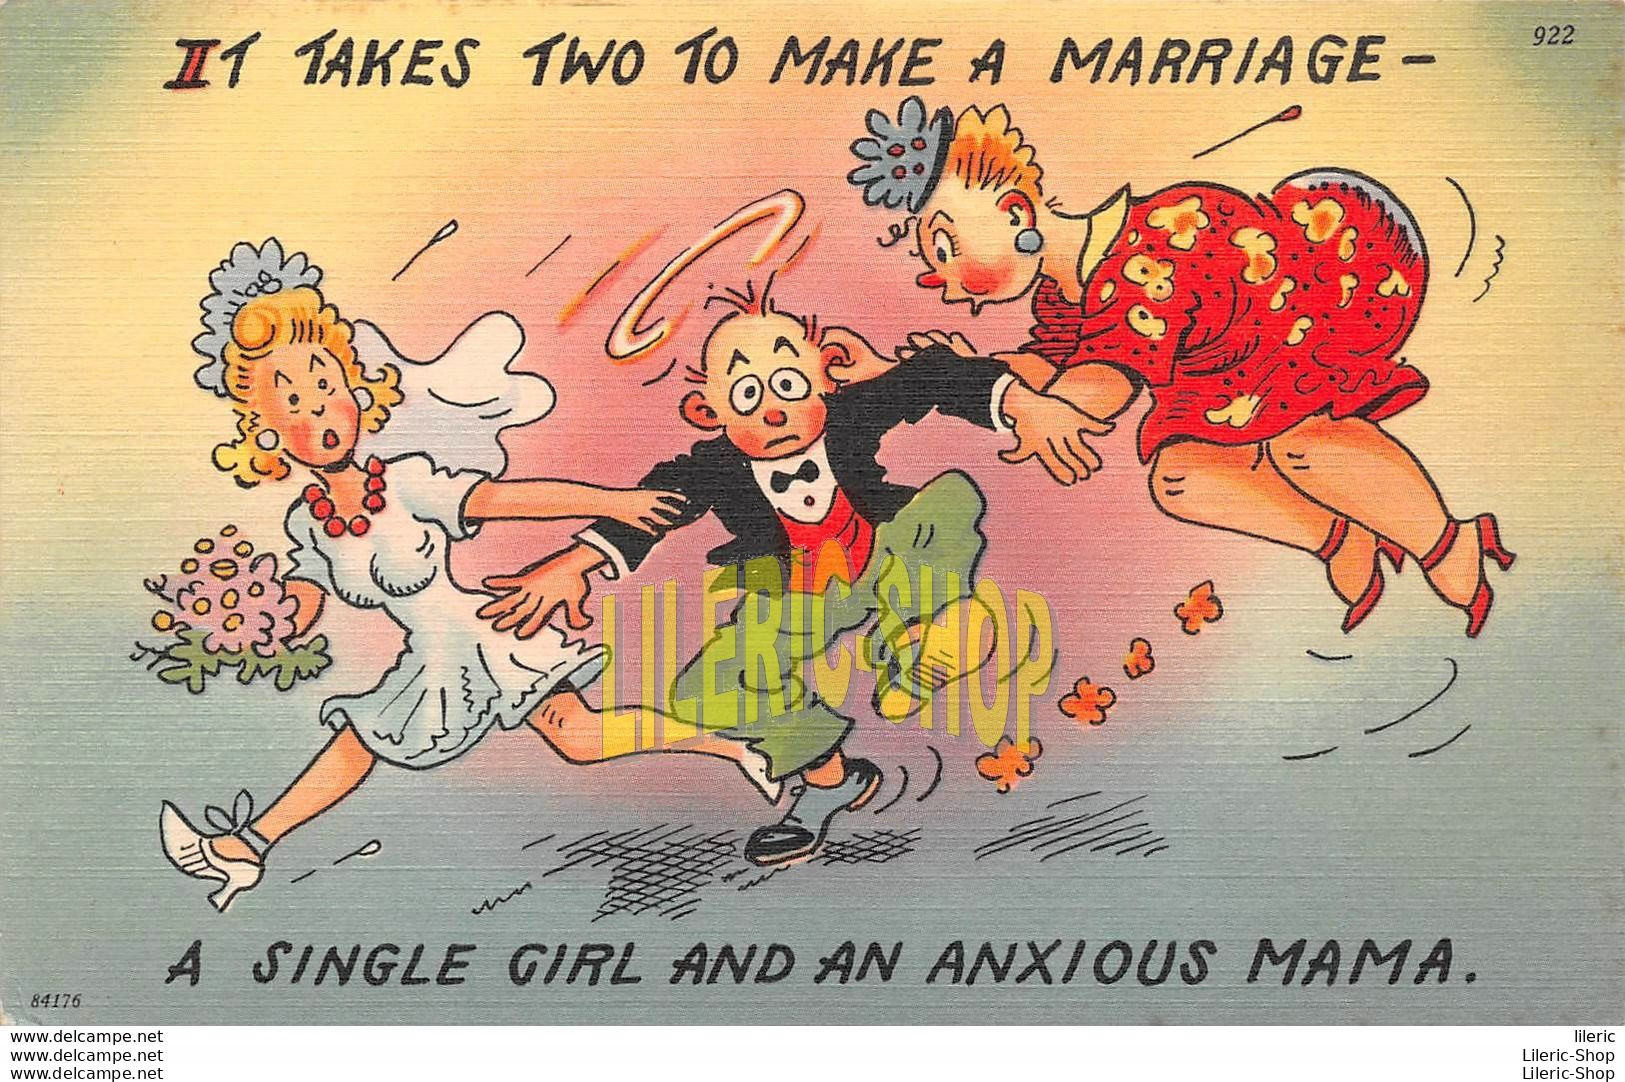 Comic Linen Postcard Tichnor 1940s "IT TAKES TWO TO MAKE A MARRIAGE " - A SINGLE GIRL AND AN ANXIOUS MAMA - Humor